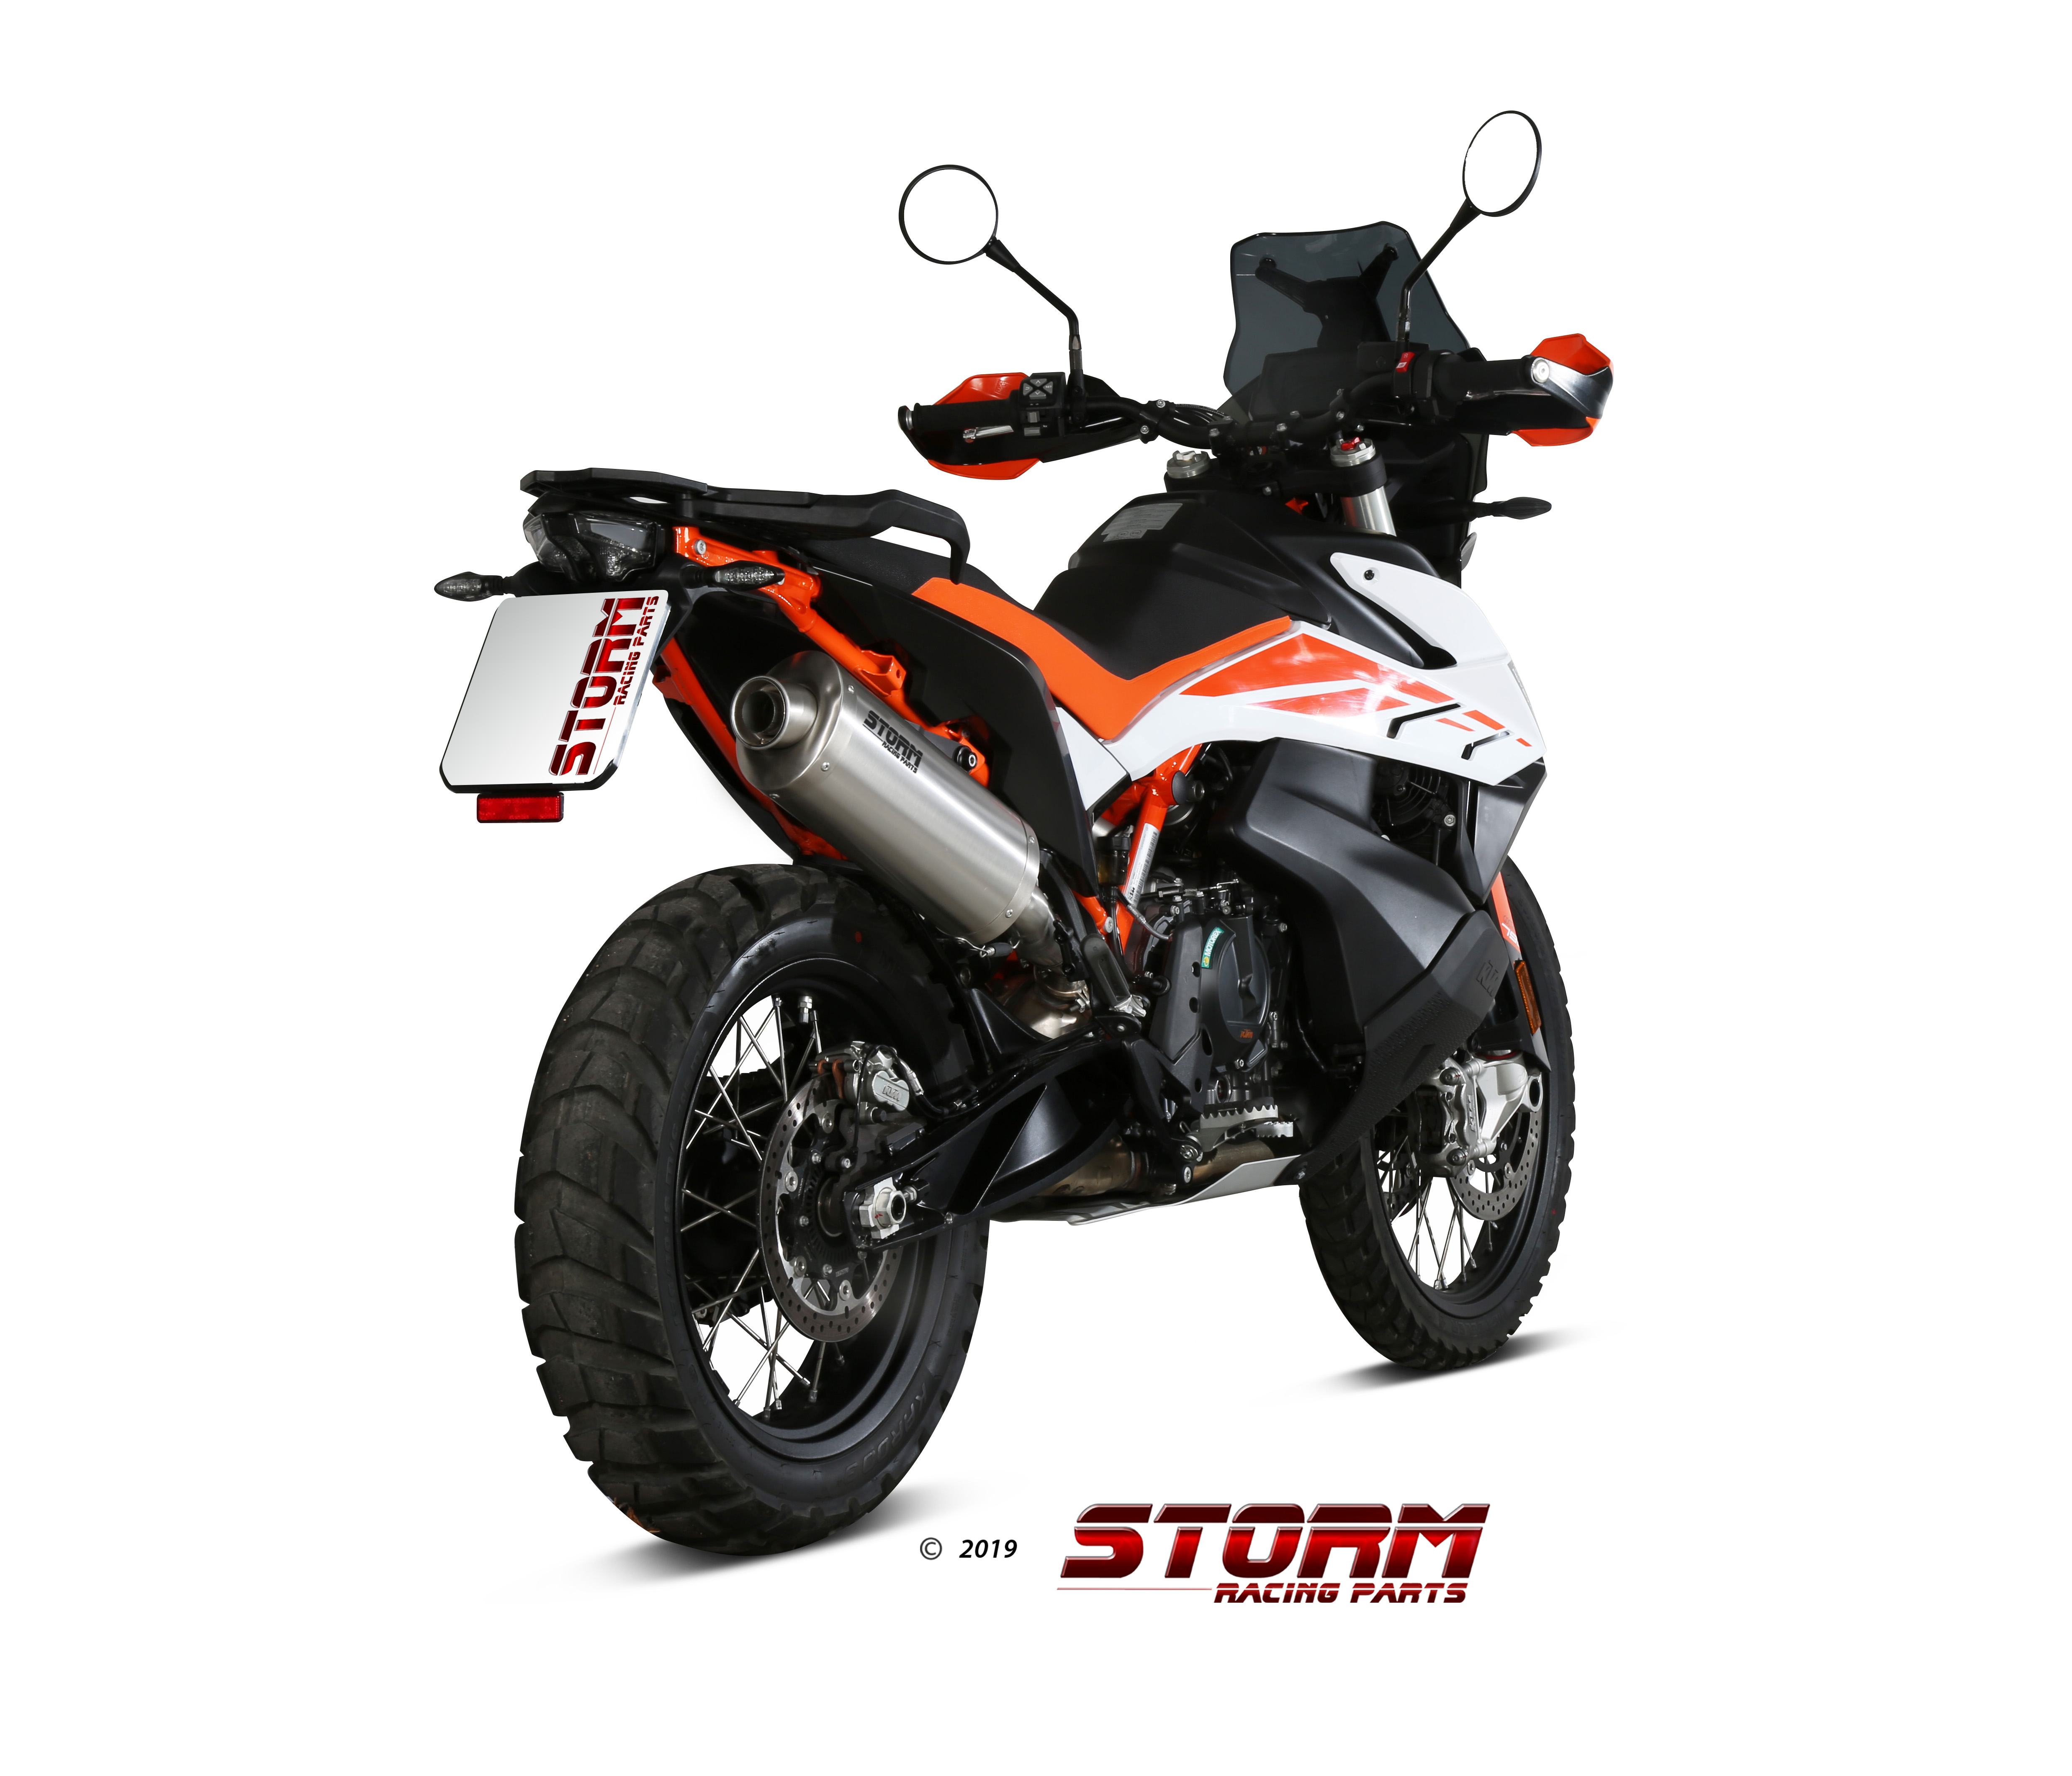 KTM 790 ADVENTURE R Exhaust Storm Oval Stainless steel KT.021.LX2 